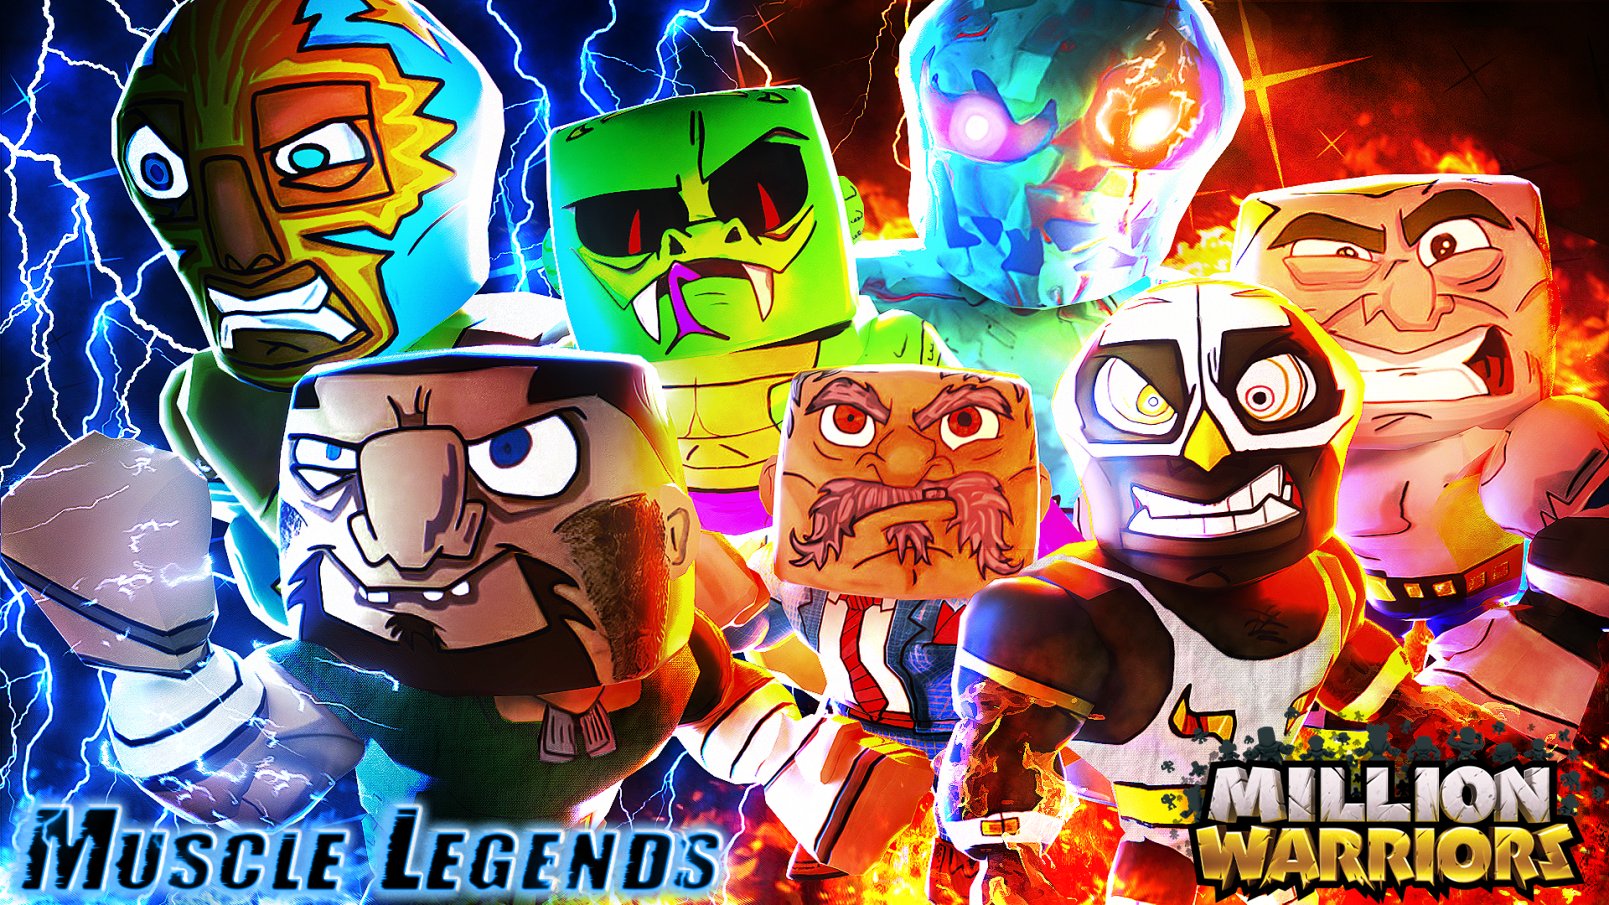 Roblox codes for Muscle Legends (July 2021)